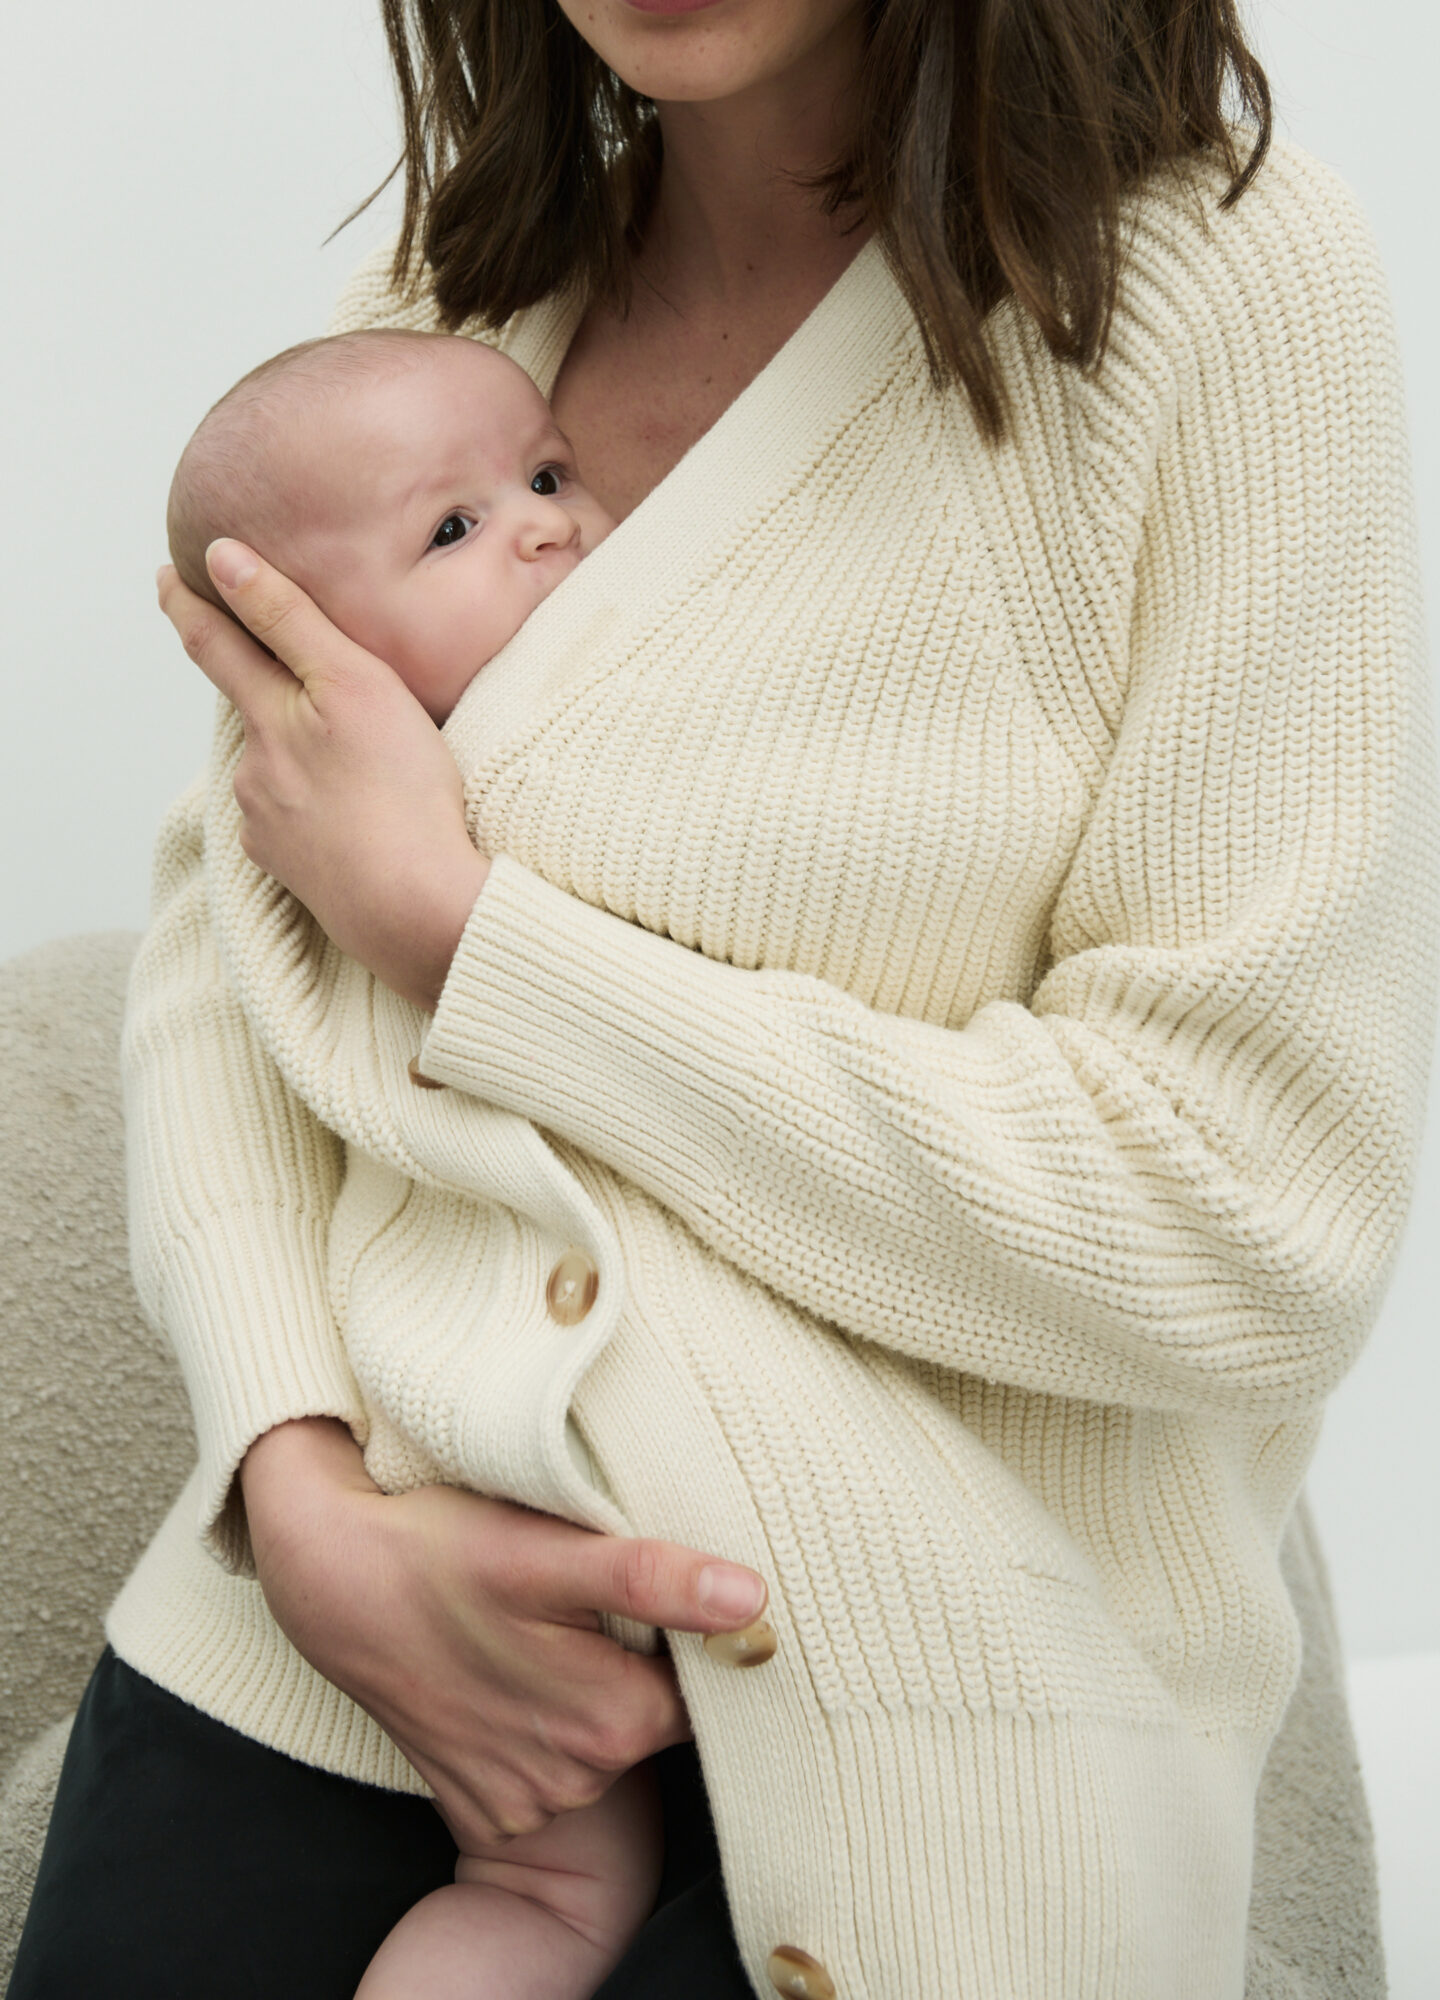 woman holding baby in a cardigan